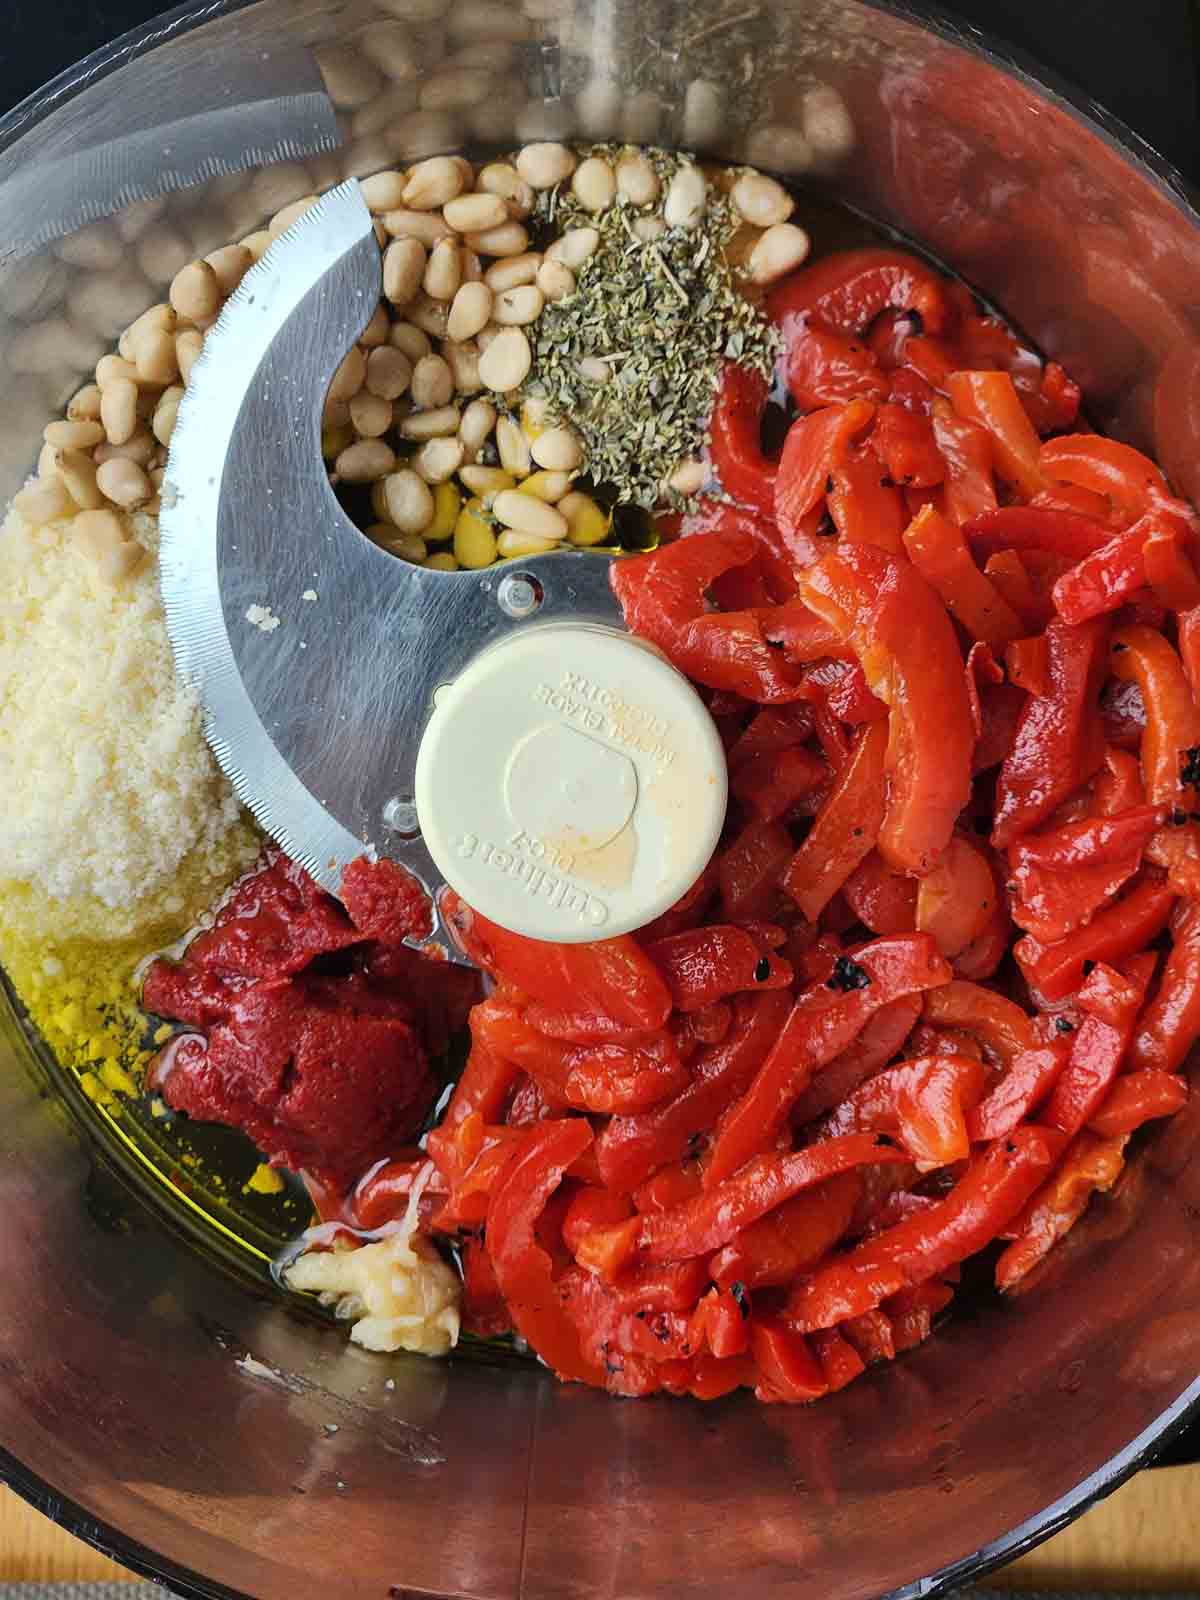 Ingredients for roasted red pepper pesto in a food processor.